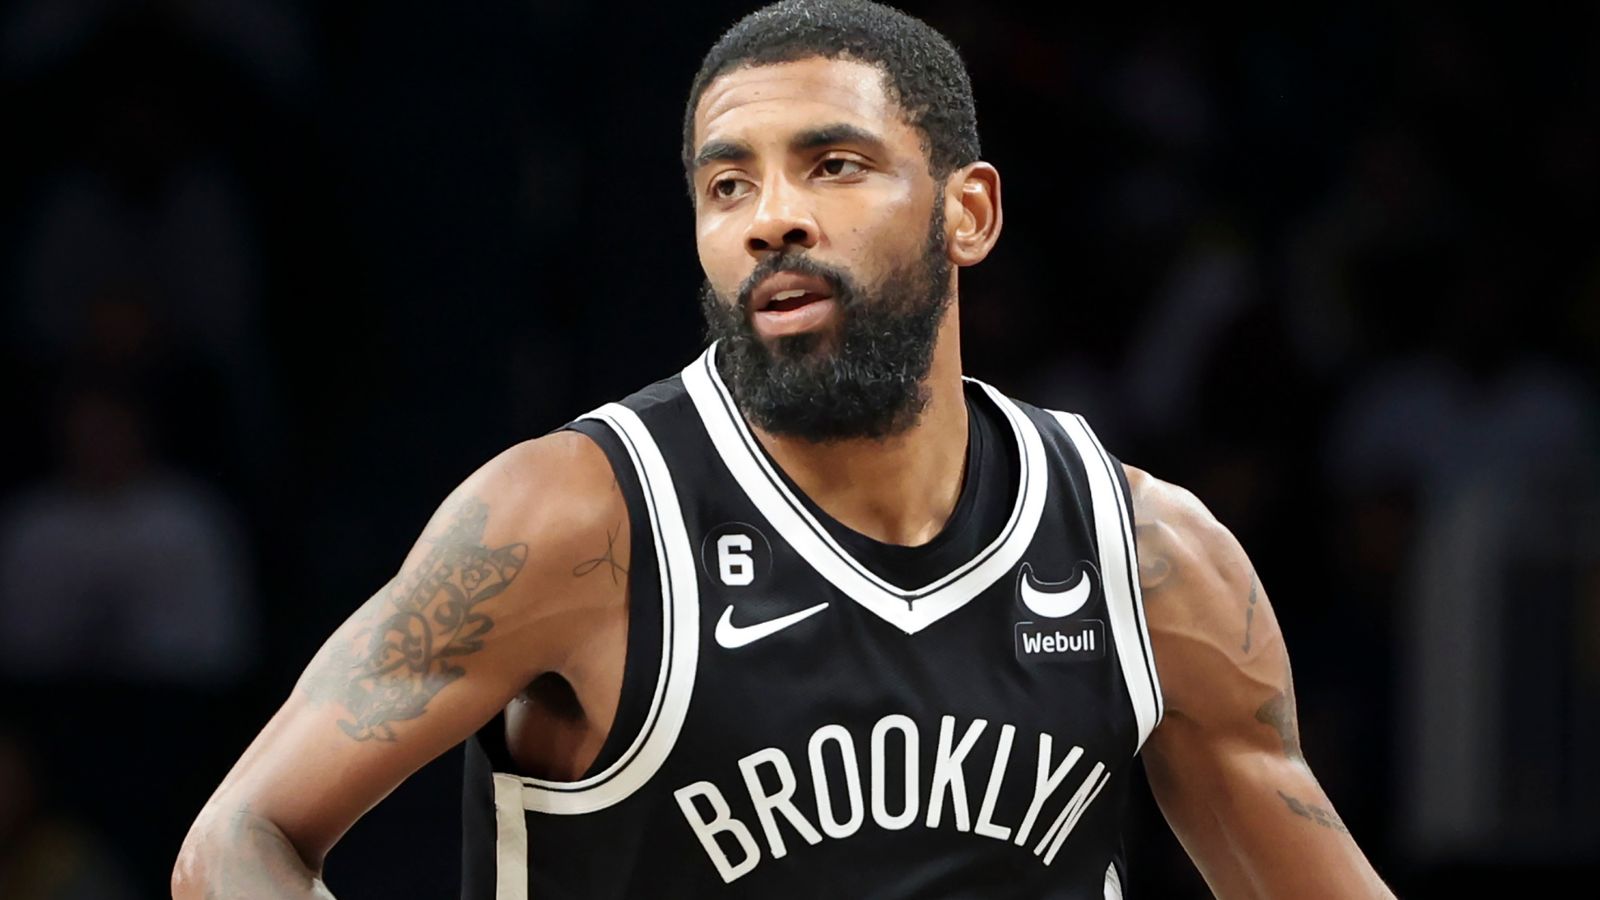 kyrie-irving-and-amp-brooklyn-nets-pledge-usd1m-after-anti-semitism-accusations-against-nba-star